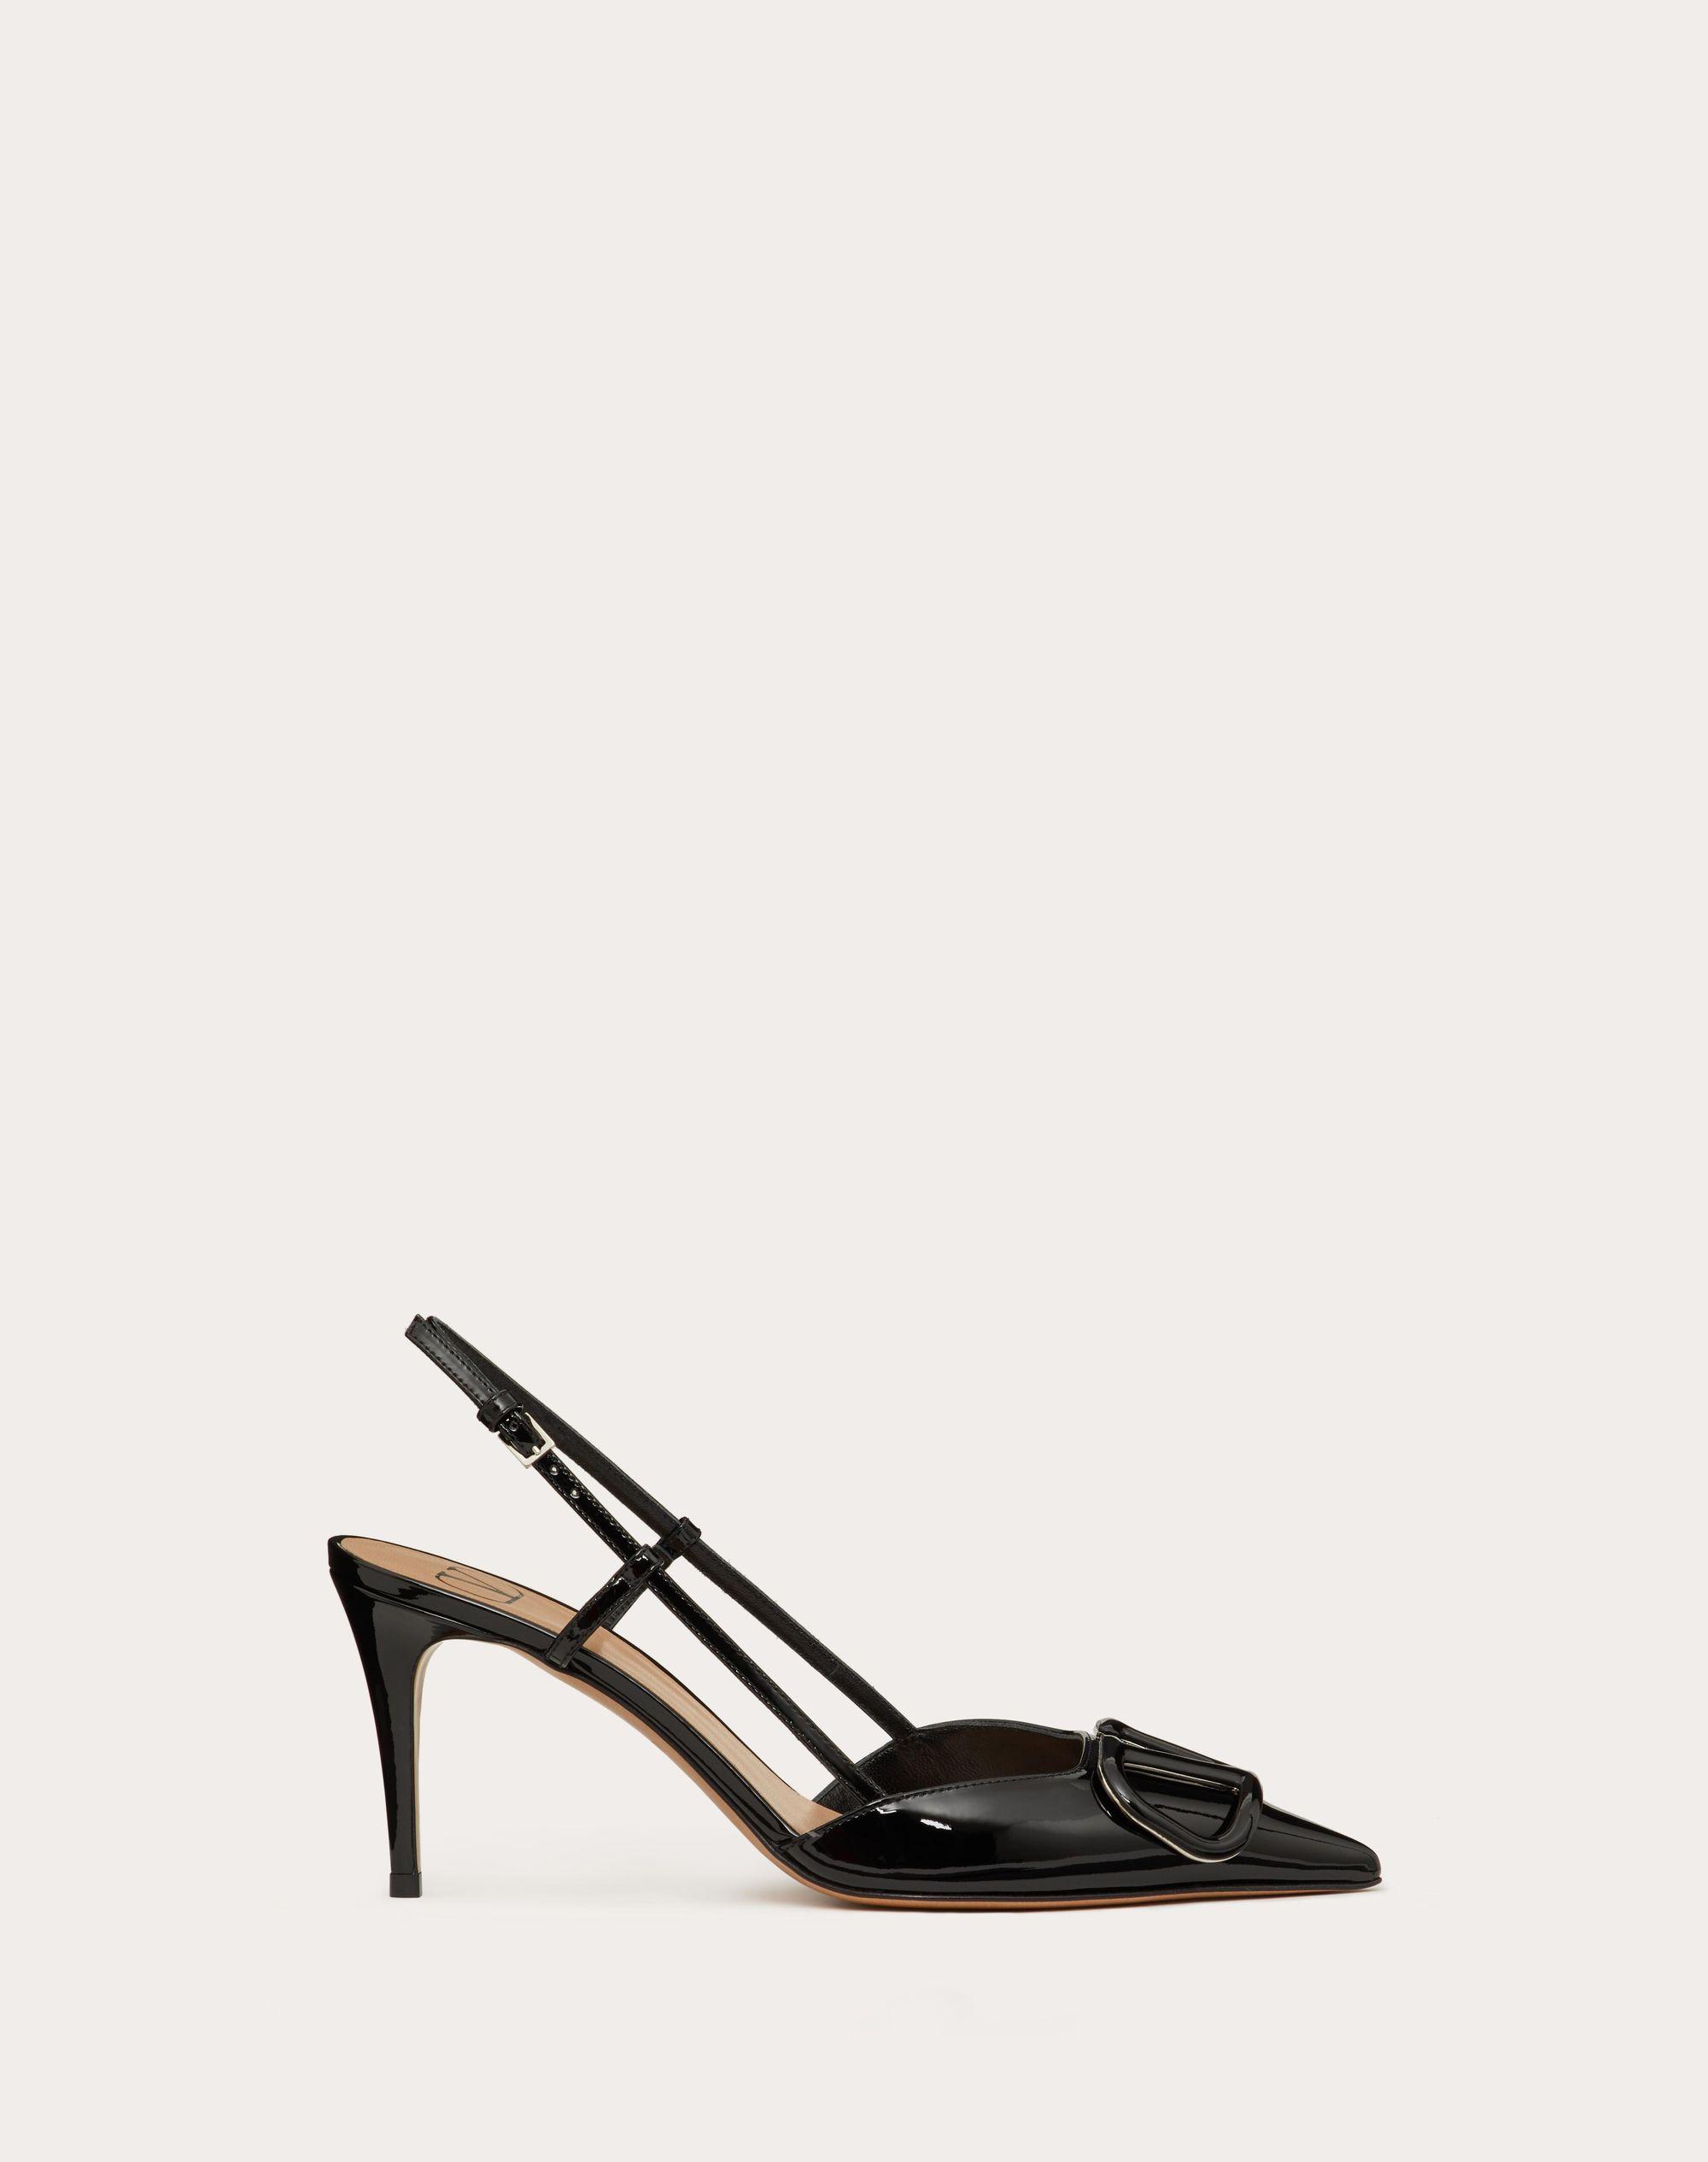 Valentino Vlogo Signature Patent Leather Slingback Pump 80mm in Black | Lyst